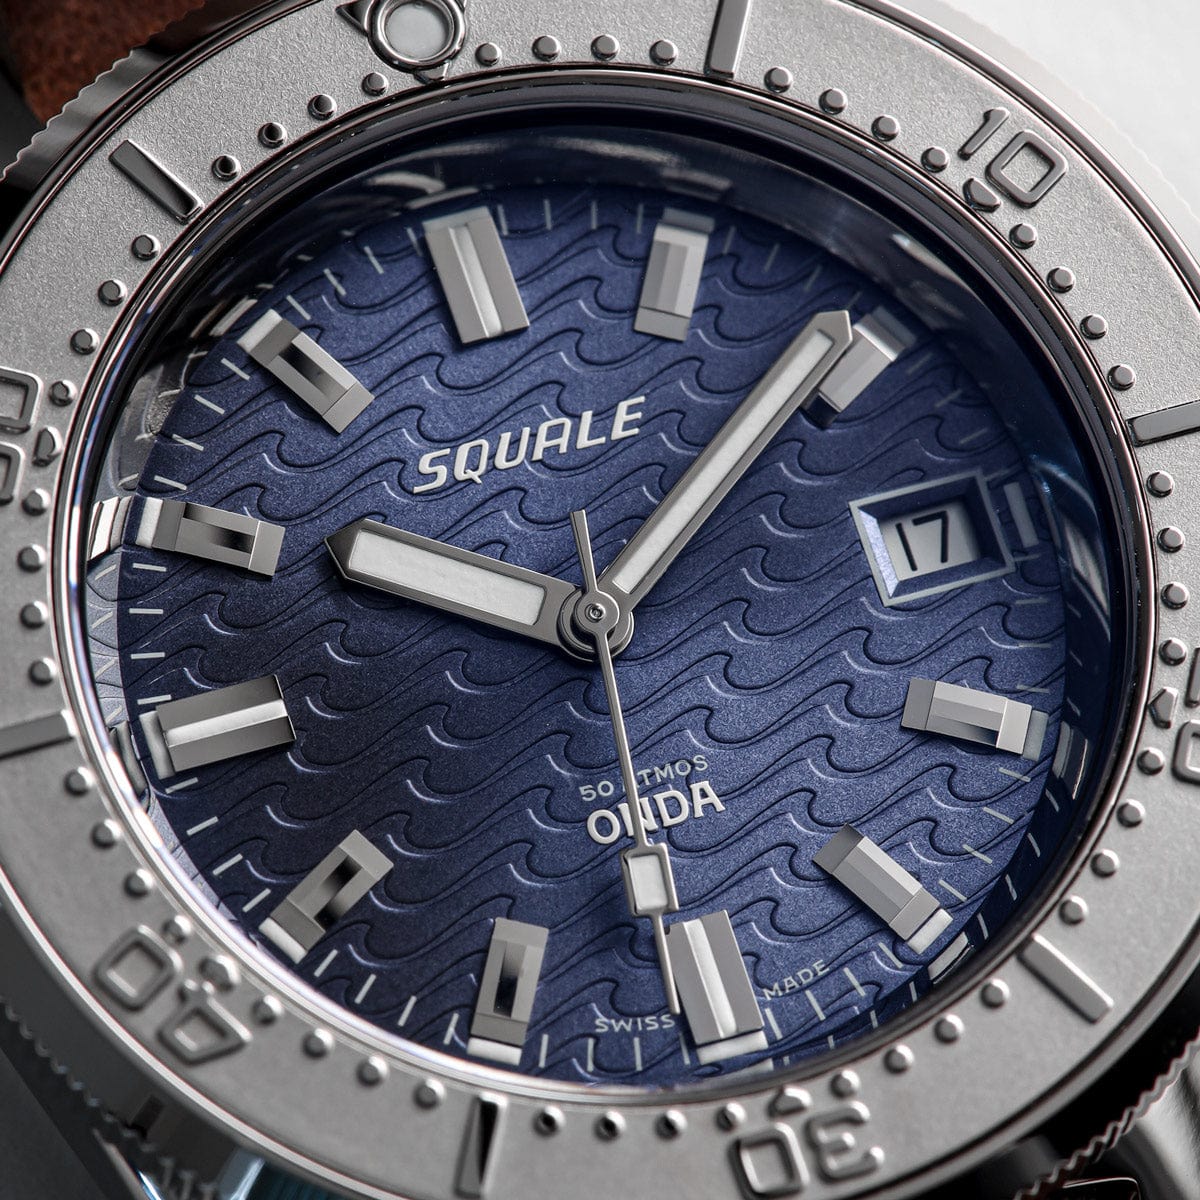 Squale 1521 Onda Blue Dial Swiss Made Diver's Watch